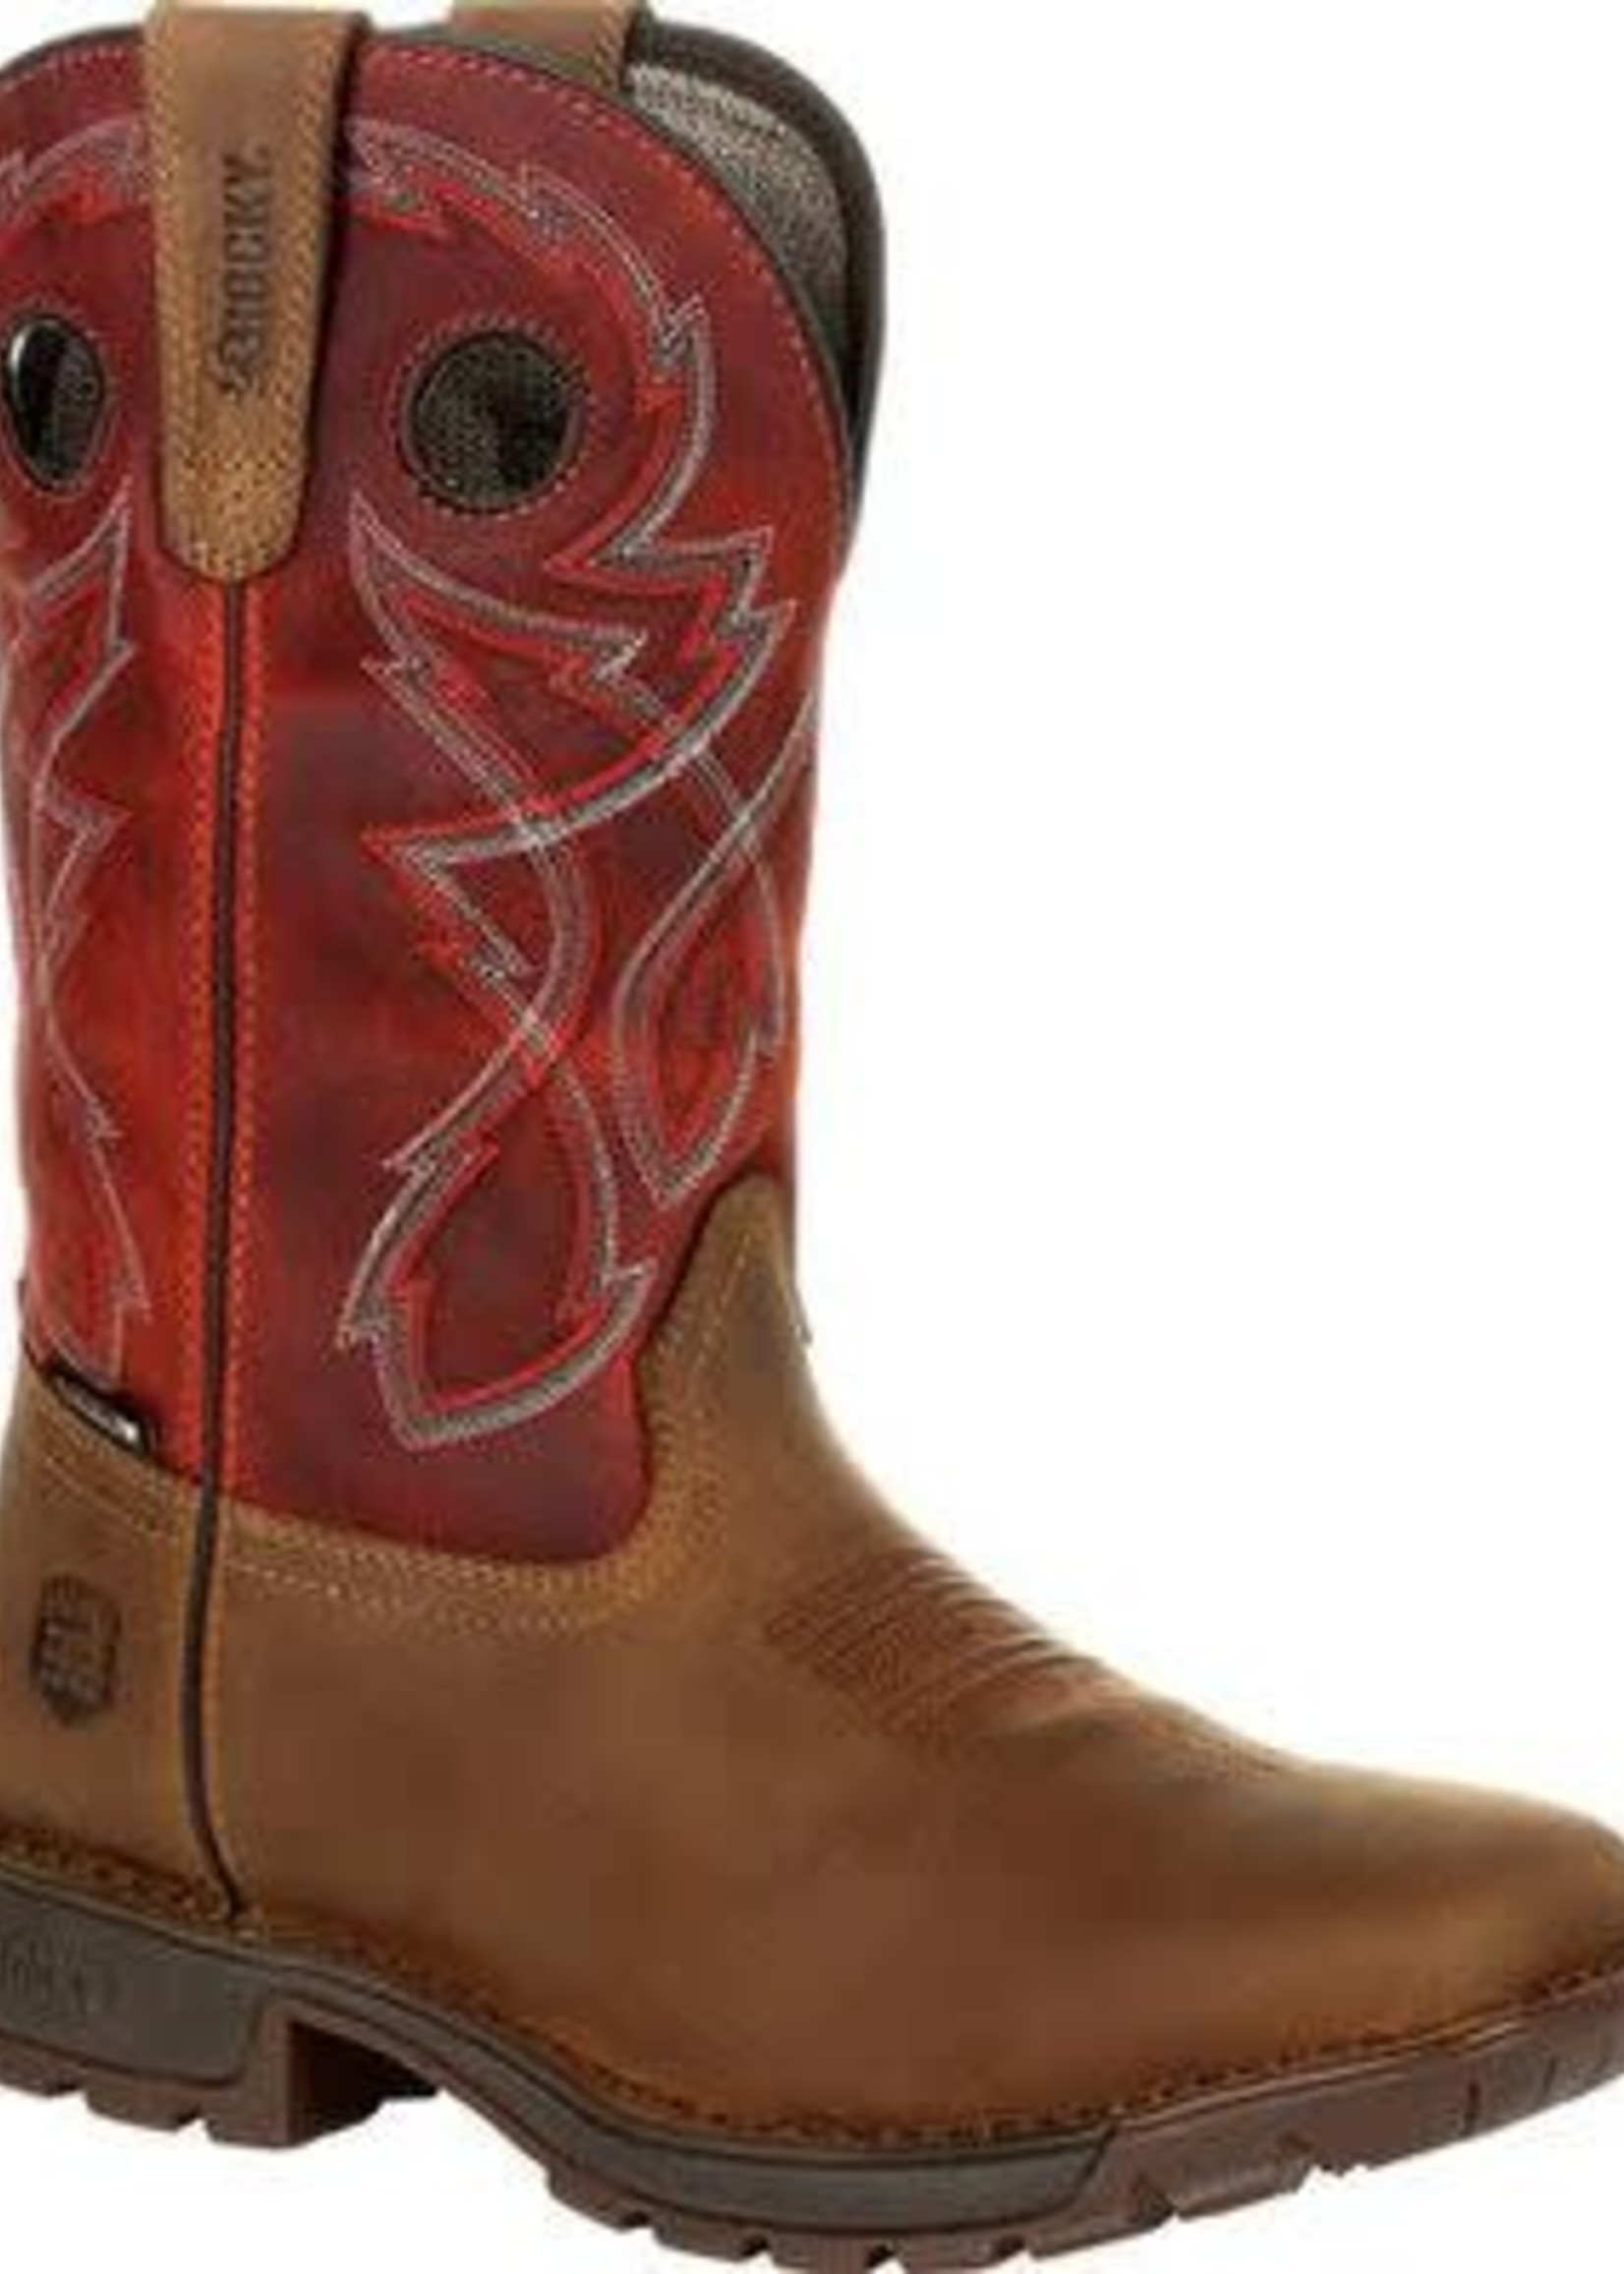 Boots-Men ROCKY RKW0316 Legacy 32